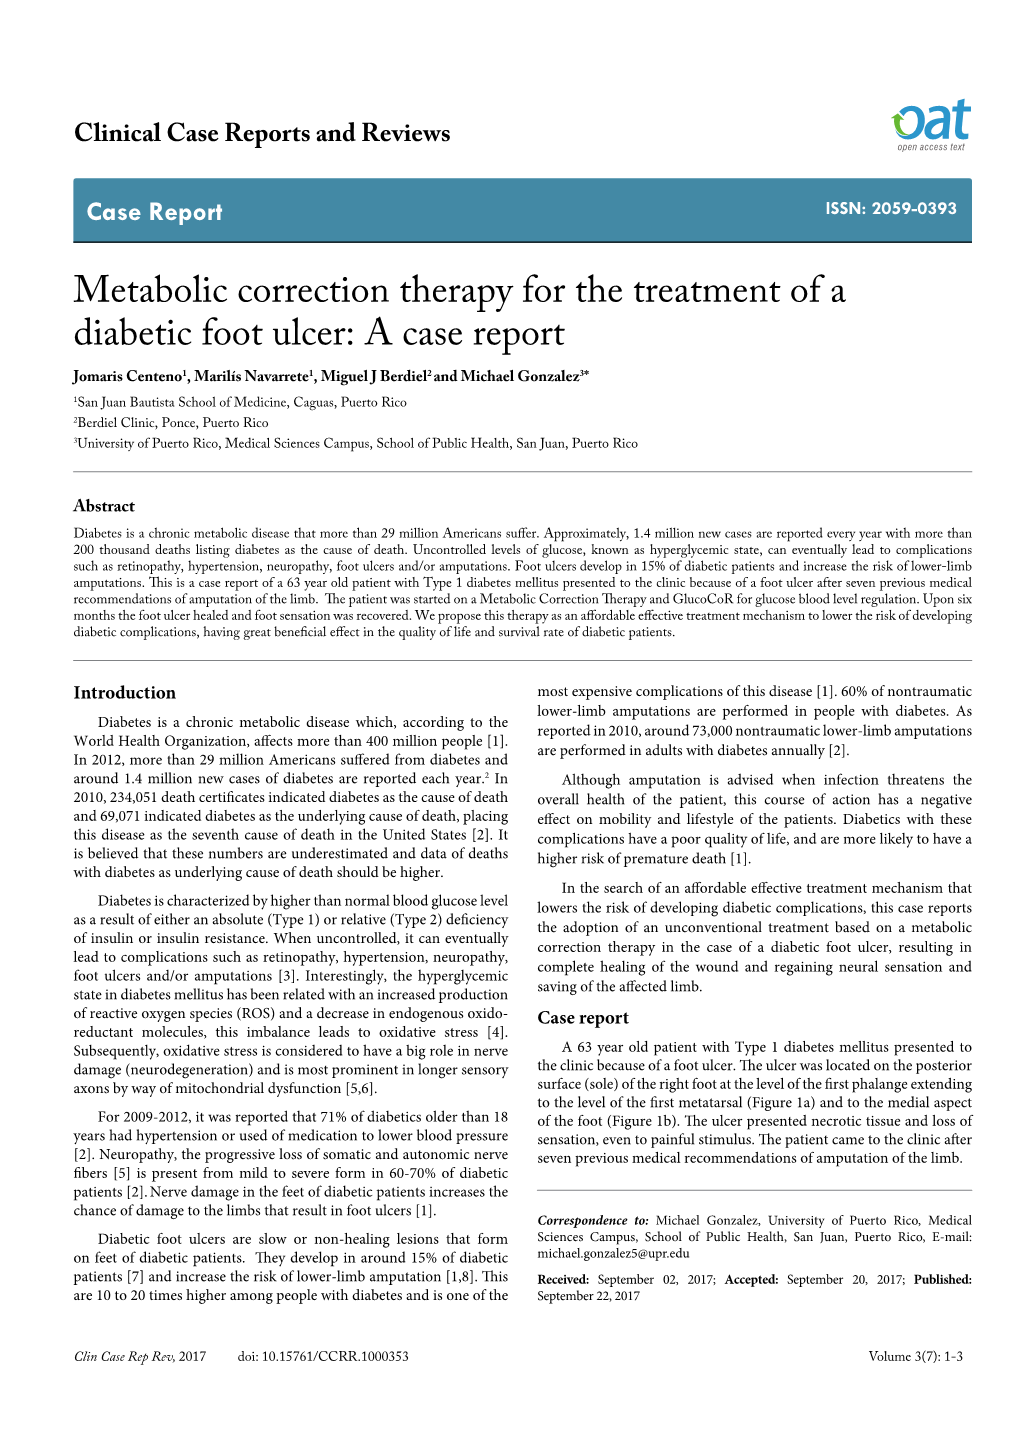 Metabolic Correction Therapy for the Treatment of A